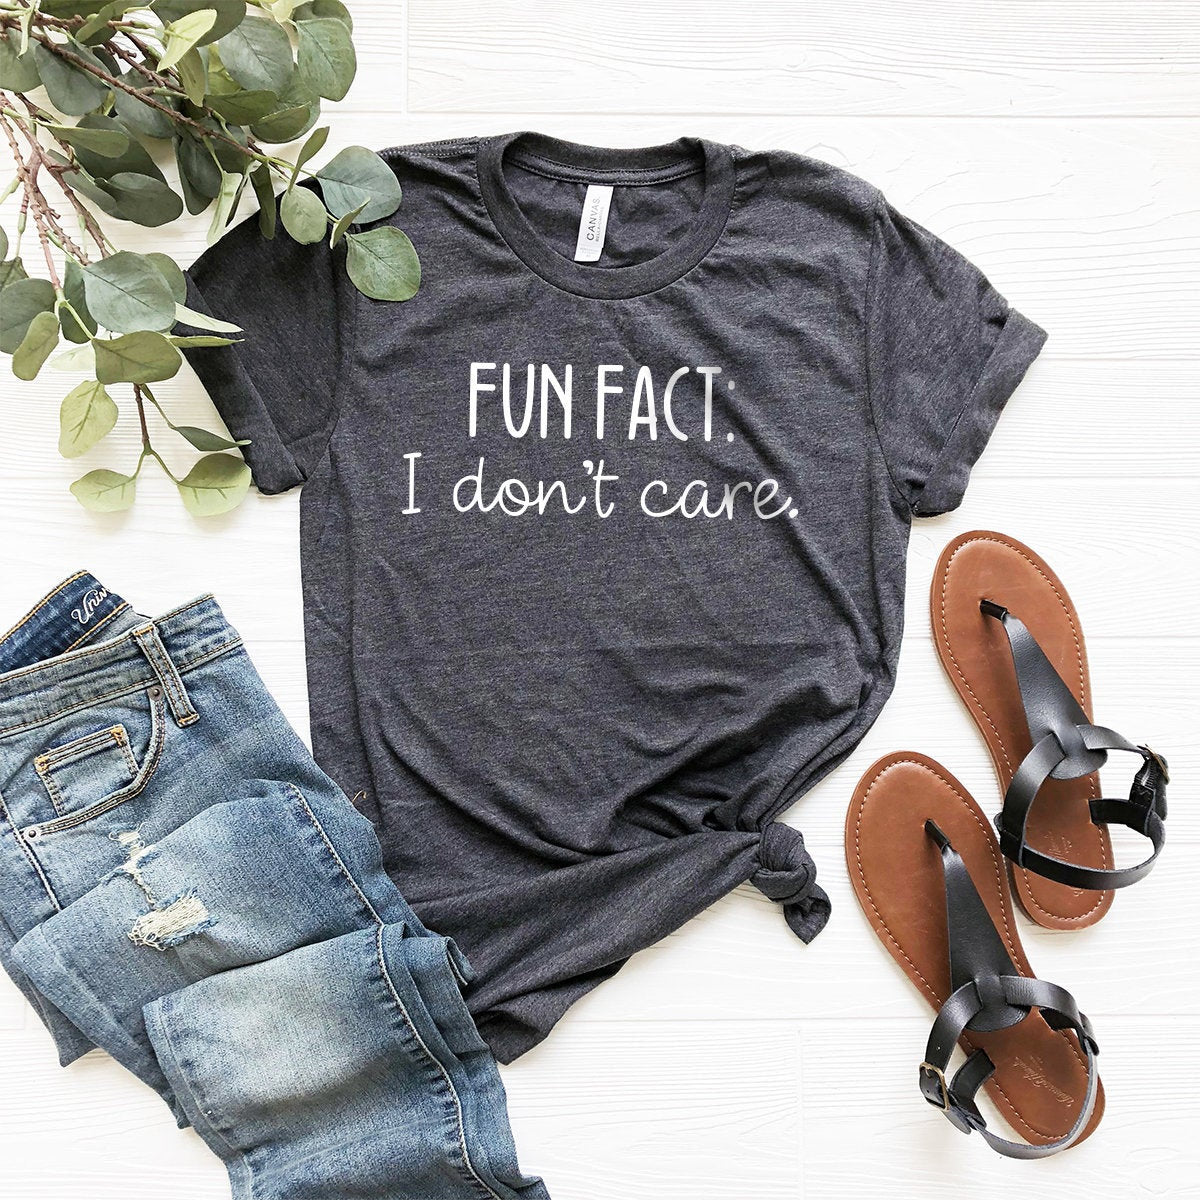 Funny Quotes Shirt, Fun Fact;I Don't Care Shirt, Inspirational Shirt, Funny Mom Shirt, Sarcastic Shirt, Gift For Friend, Shirt With Saying - Fastdeliverytees.com